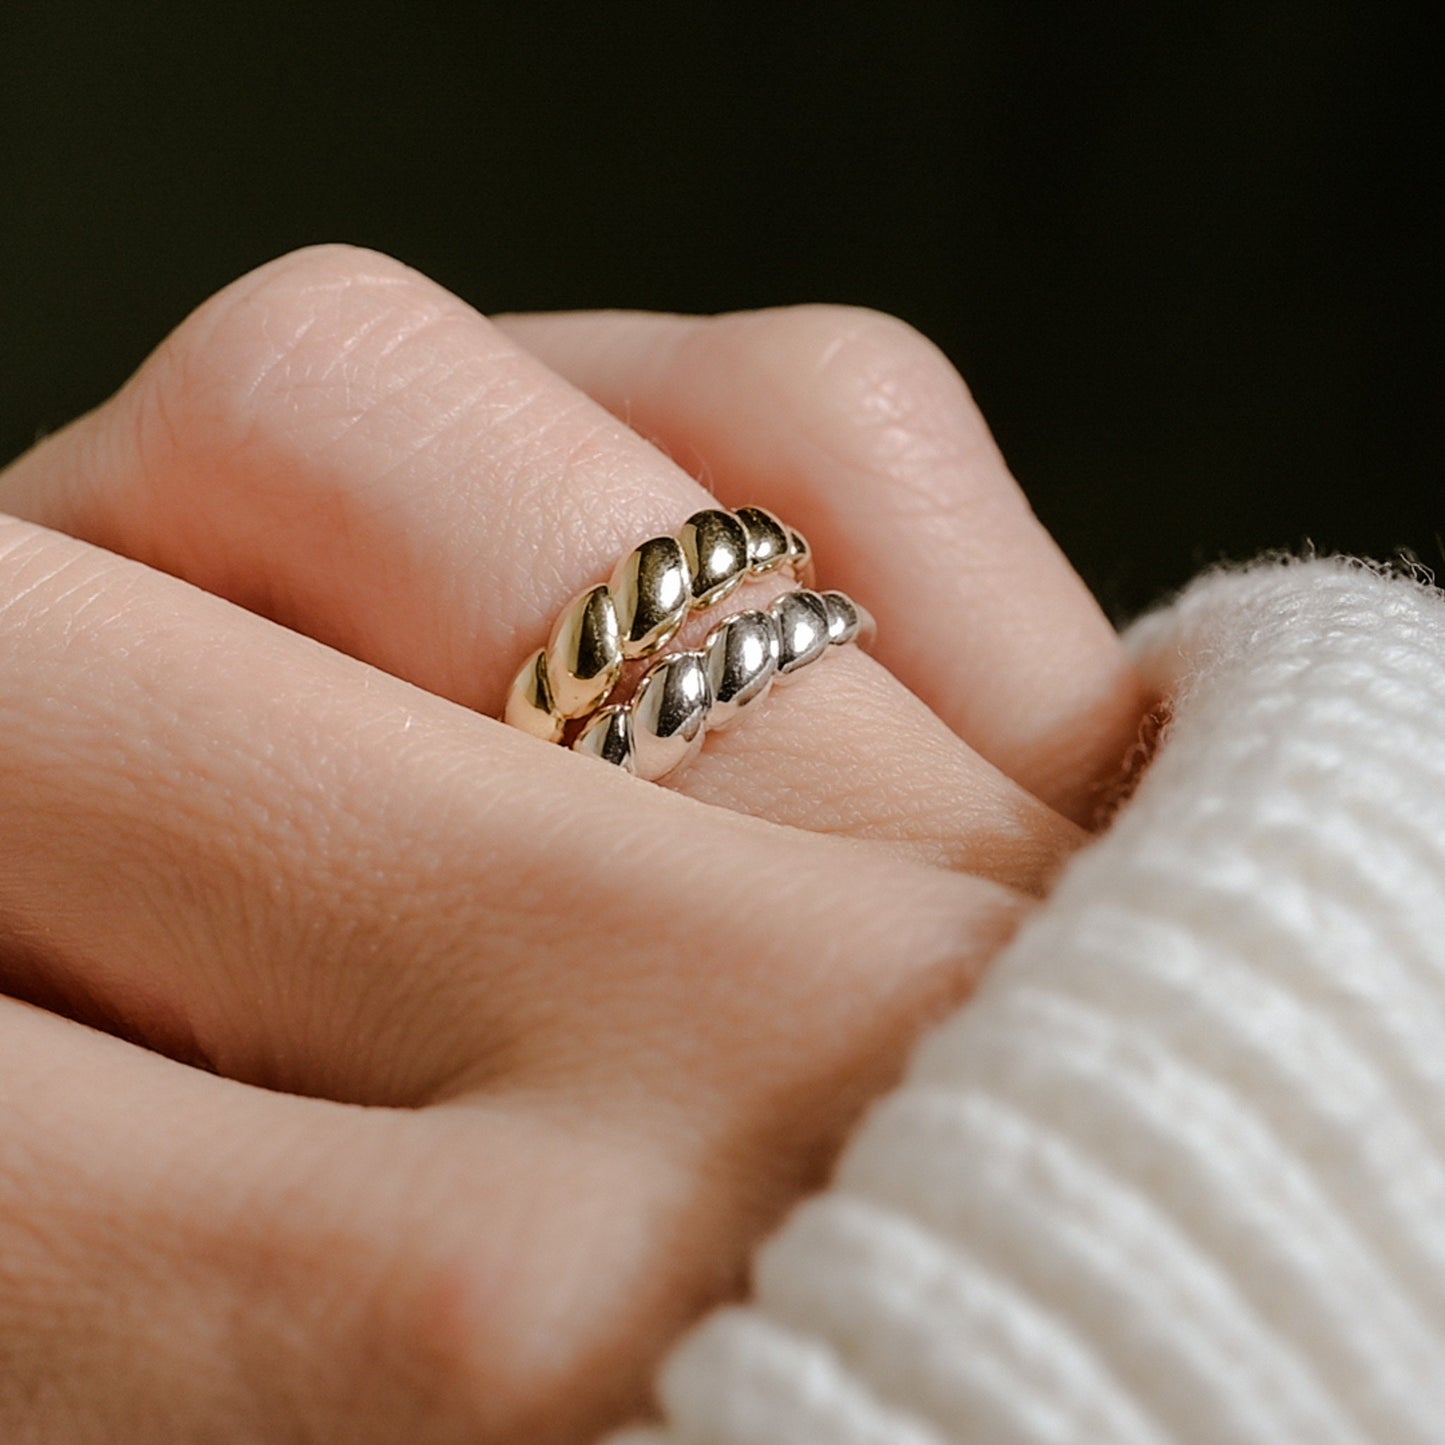 Rope Croissant Ring or Dome Ring in Silver, Vermeil, or 14k Gold plate